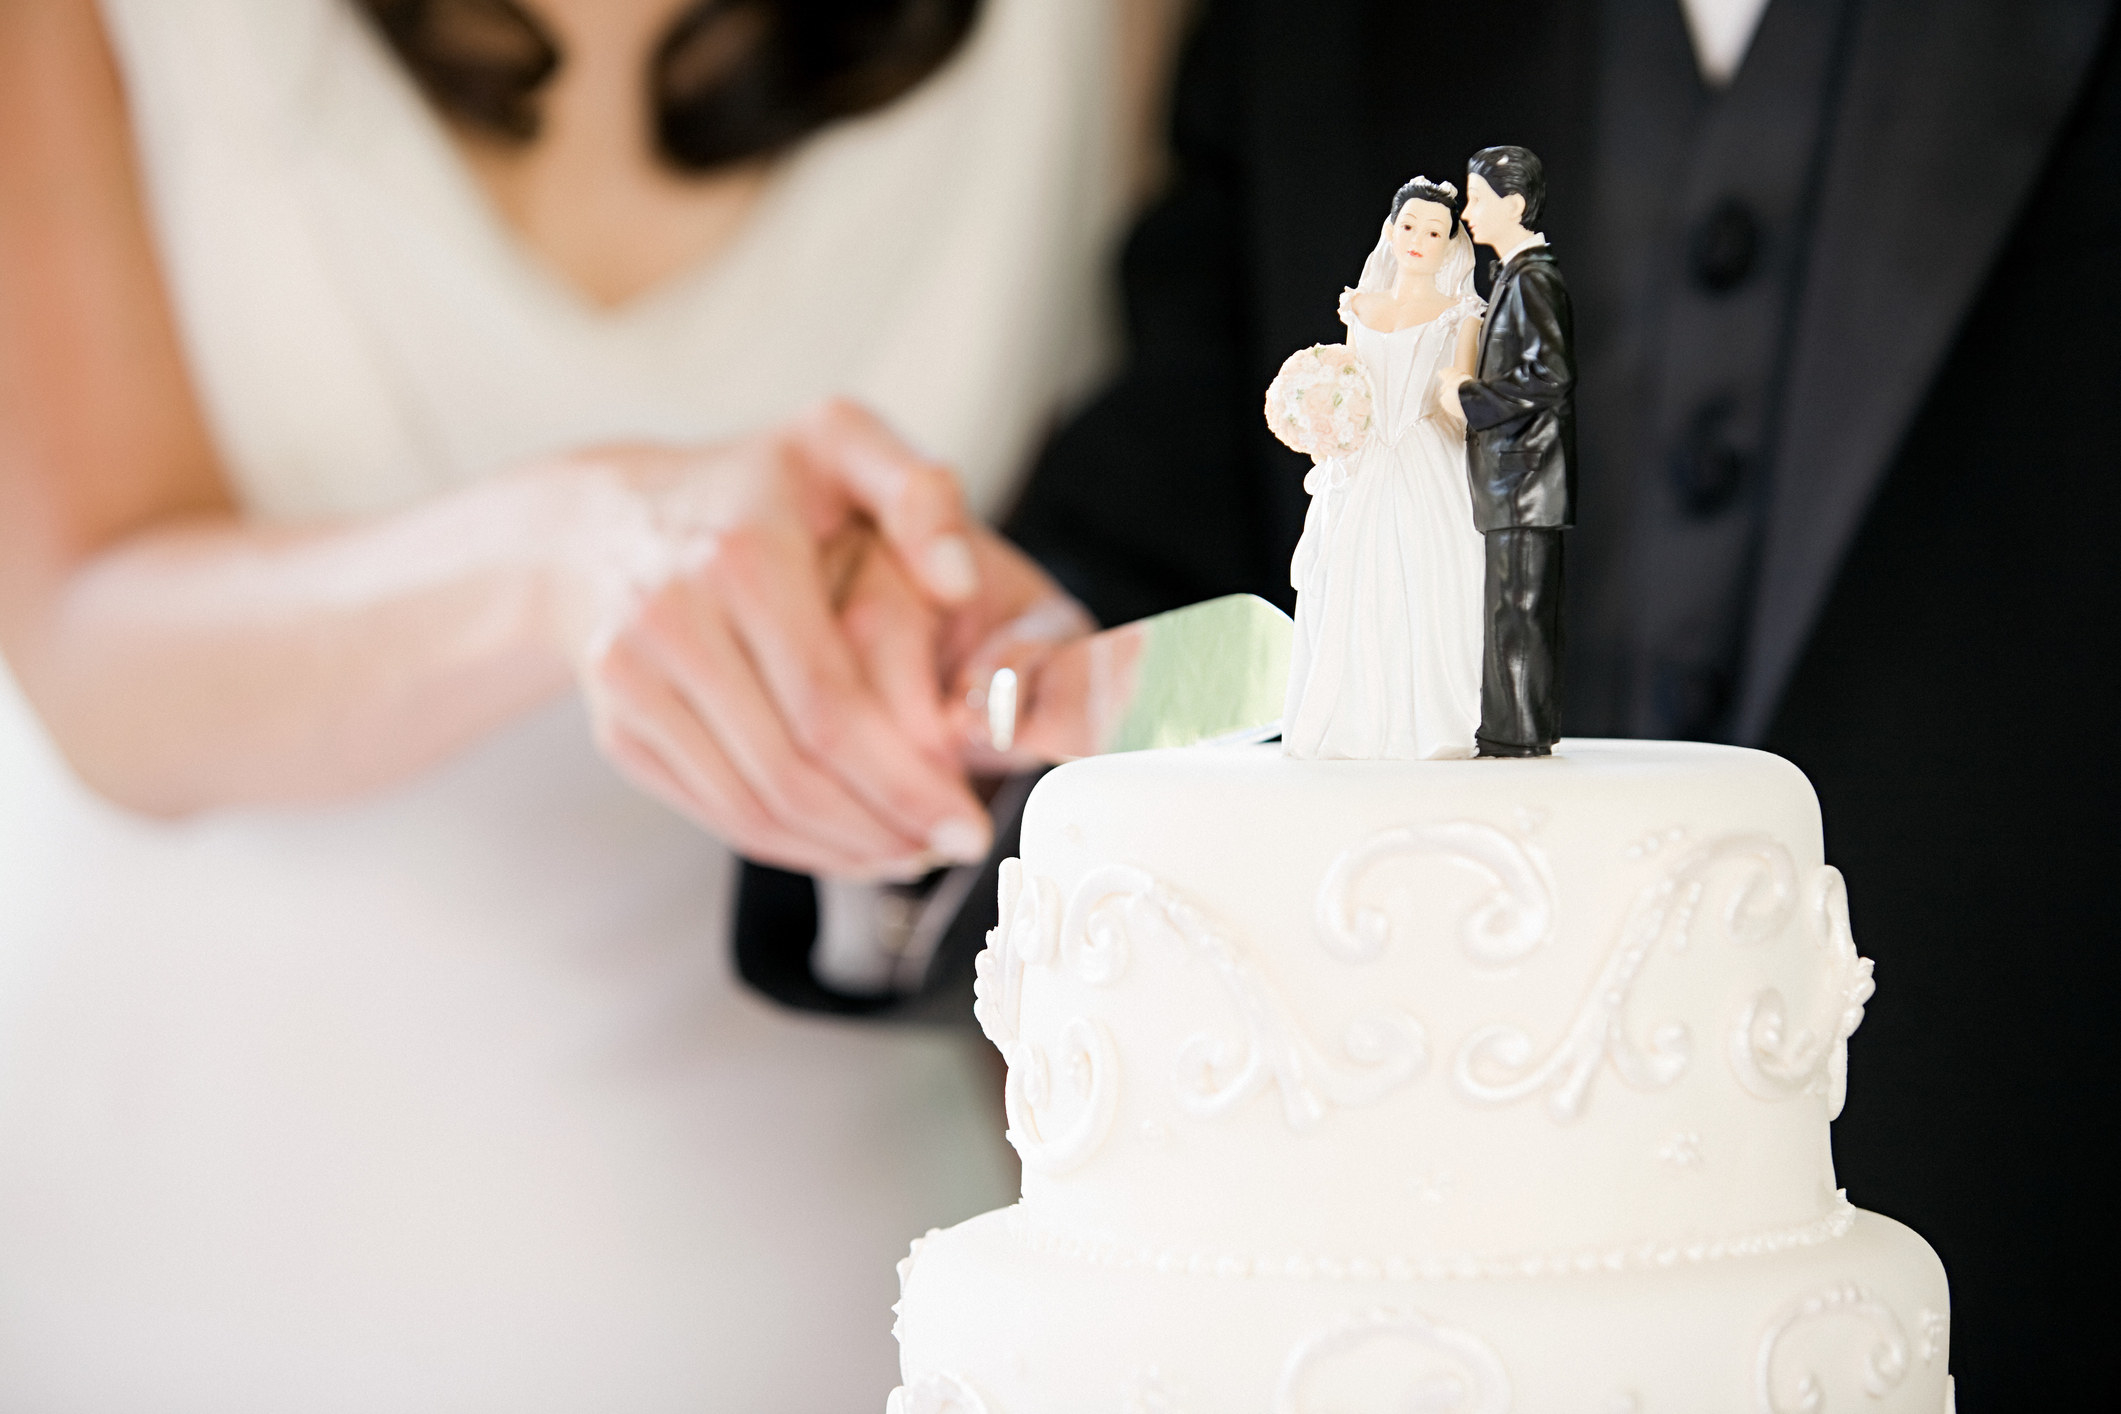 a pair of hands cut into a wedding cake